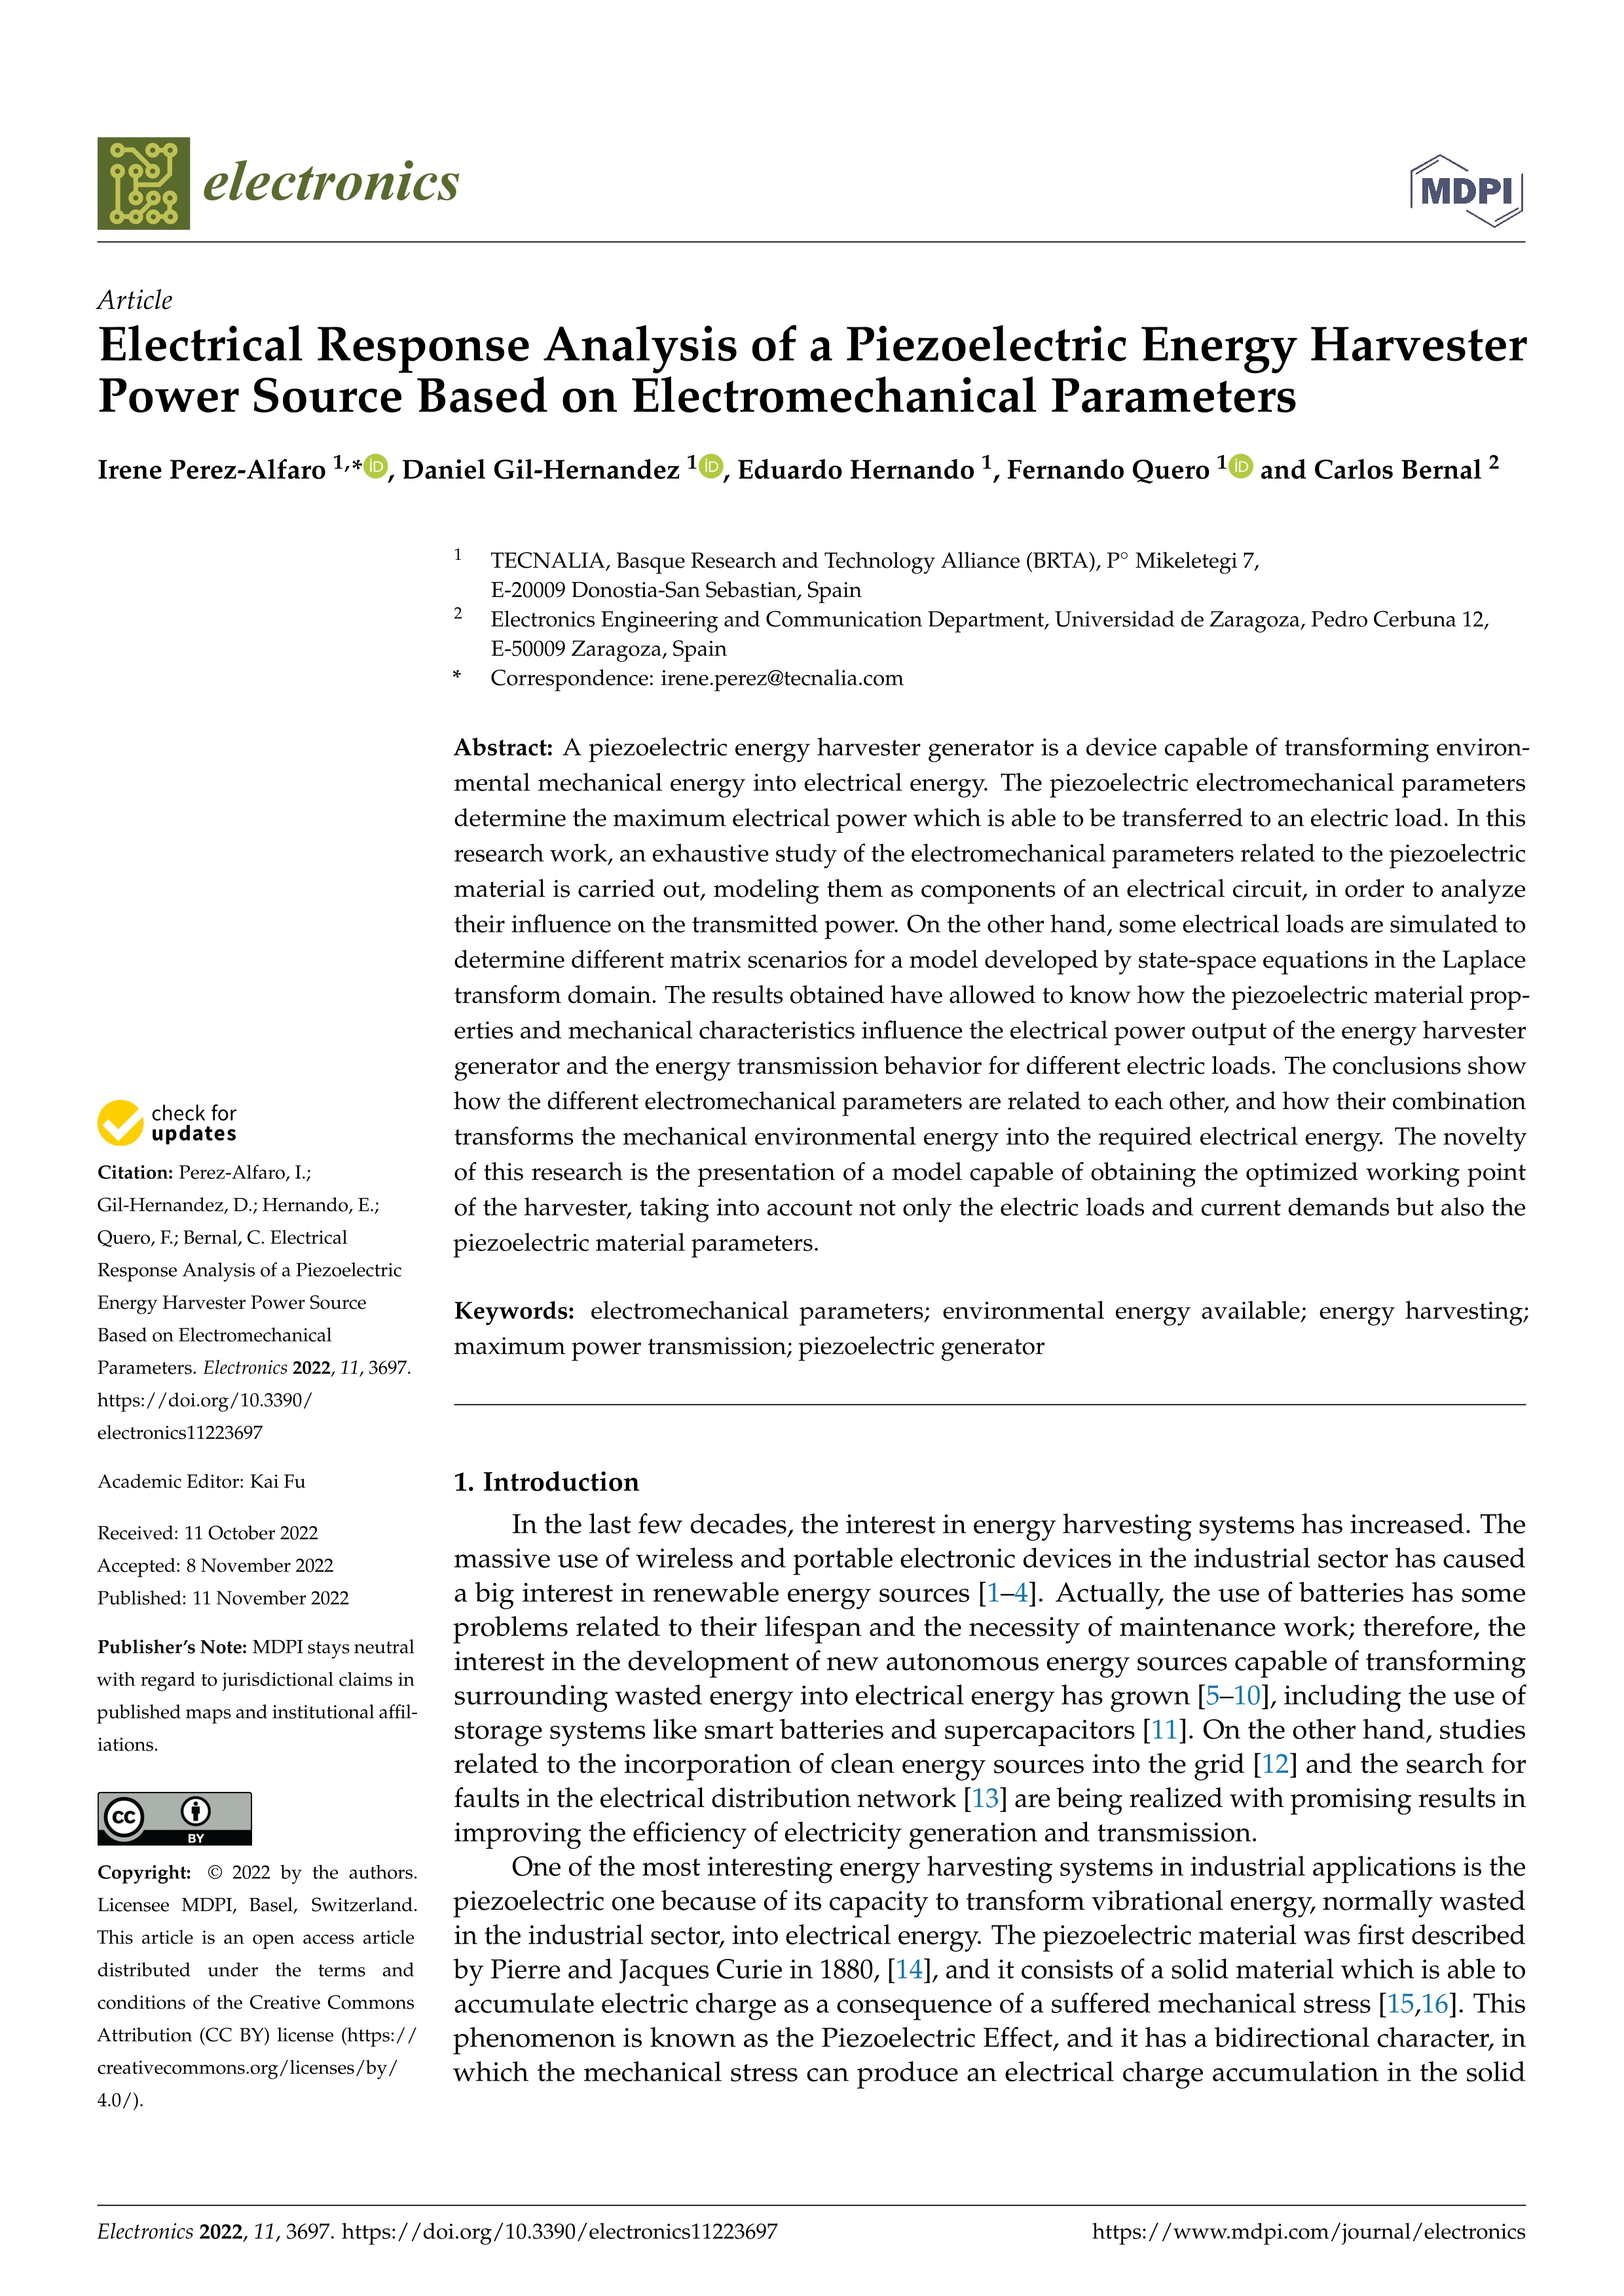 Electrical Response Analysis of a Piezoelectric Energy Harvester Power Source Based on Electromechanical Parameters